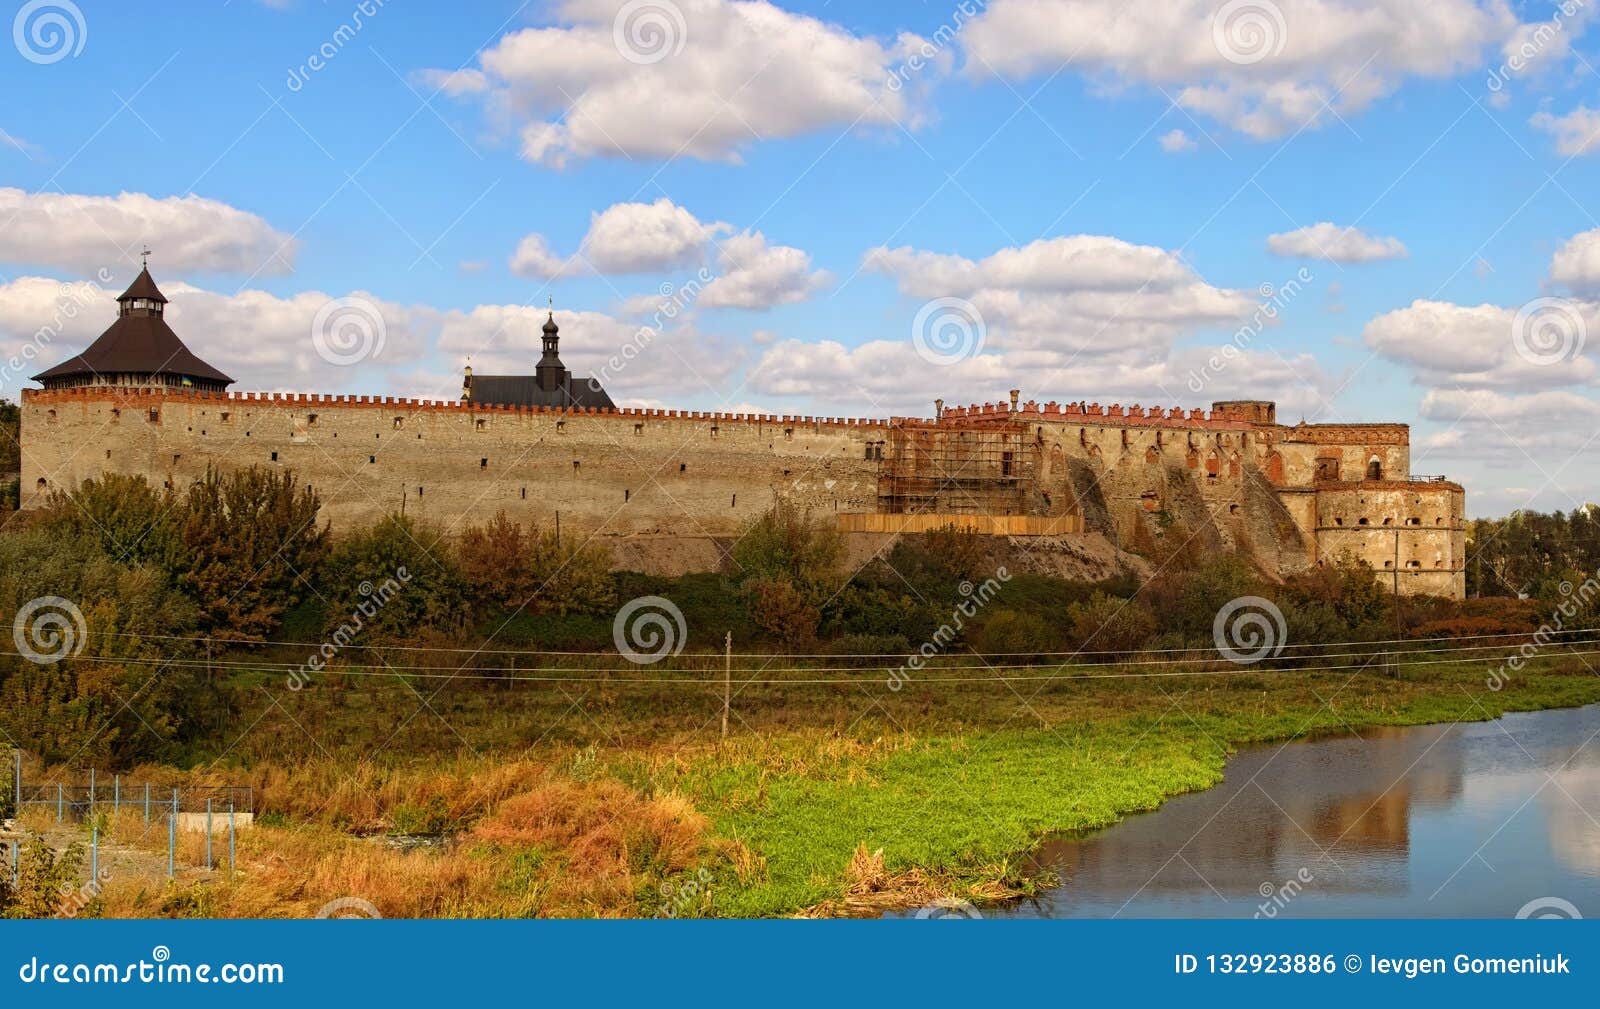 panoramic view of ancient medzhybizh castle. fortress built as a bulwark against ottoman expansion in the 1540s. medzhybizh